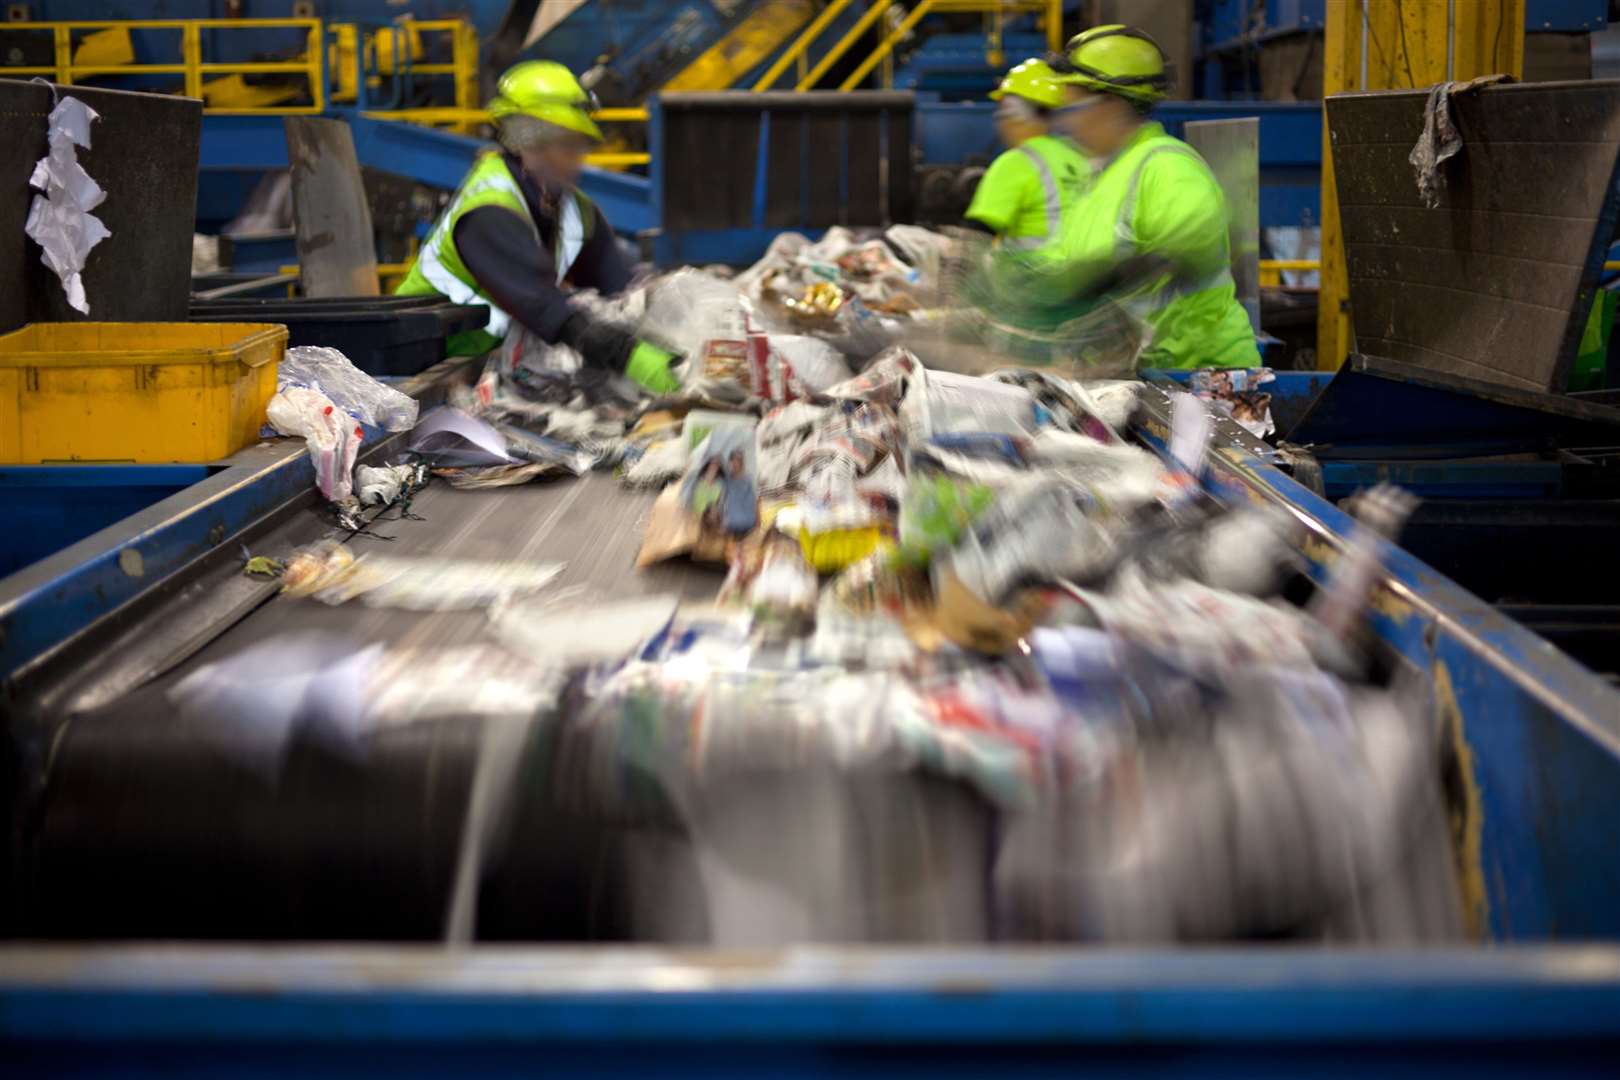 It is expected that the government wants to see councils do more to separate recycling. Image: iStock.